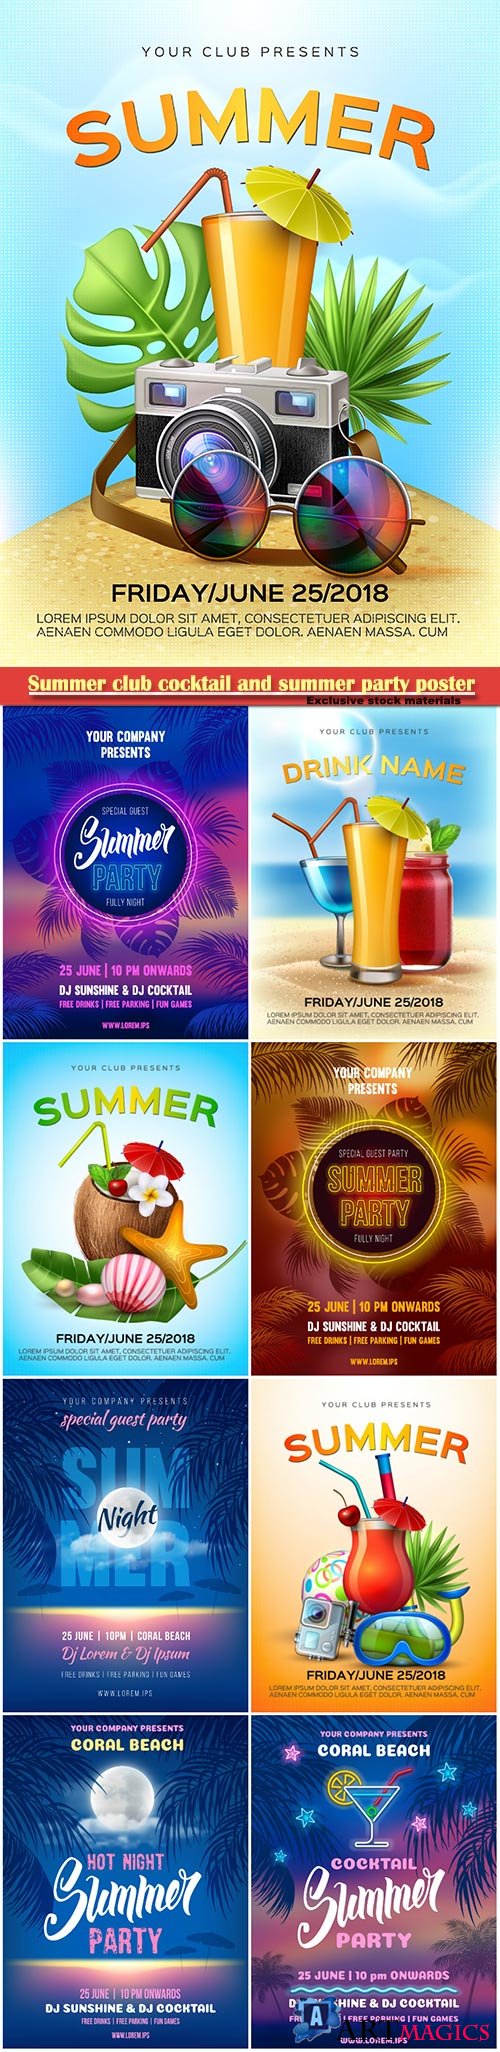 Summer club cocktail and summer night party poster template